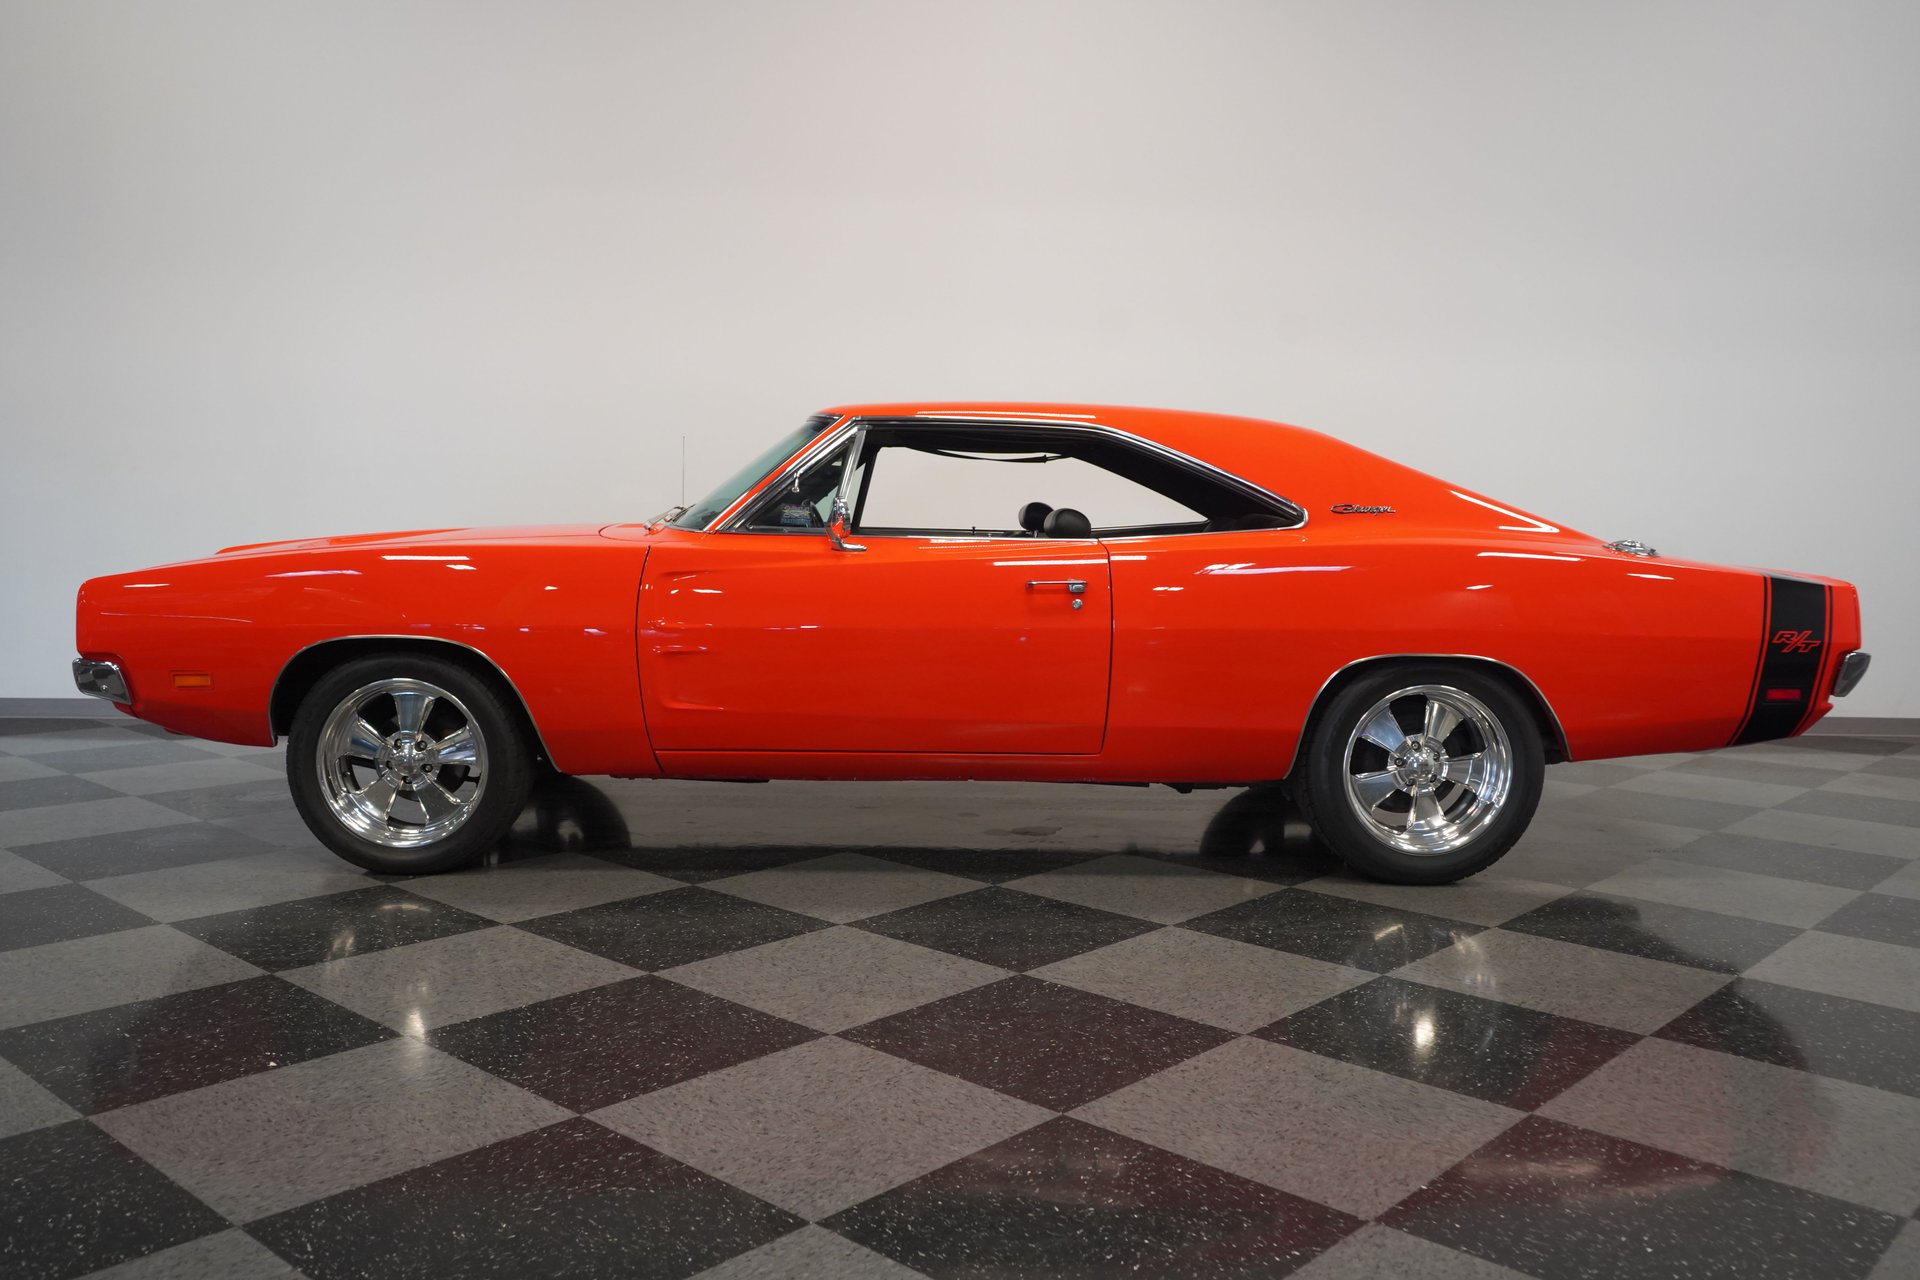 1969 Dodge Charger Classic Cars For Sale Streetside Classics